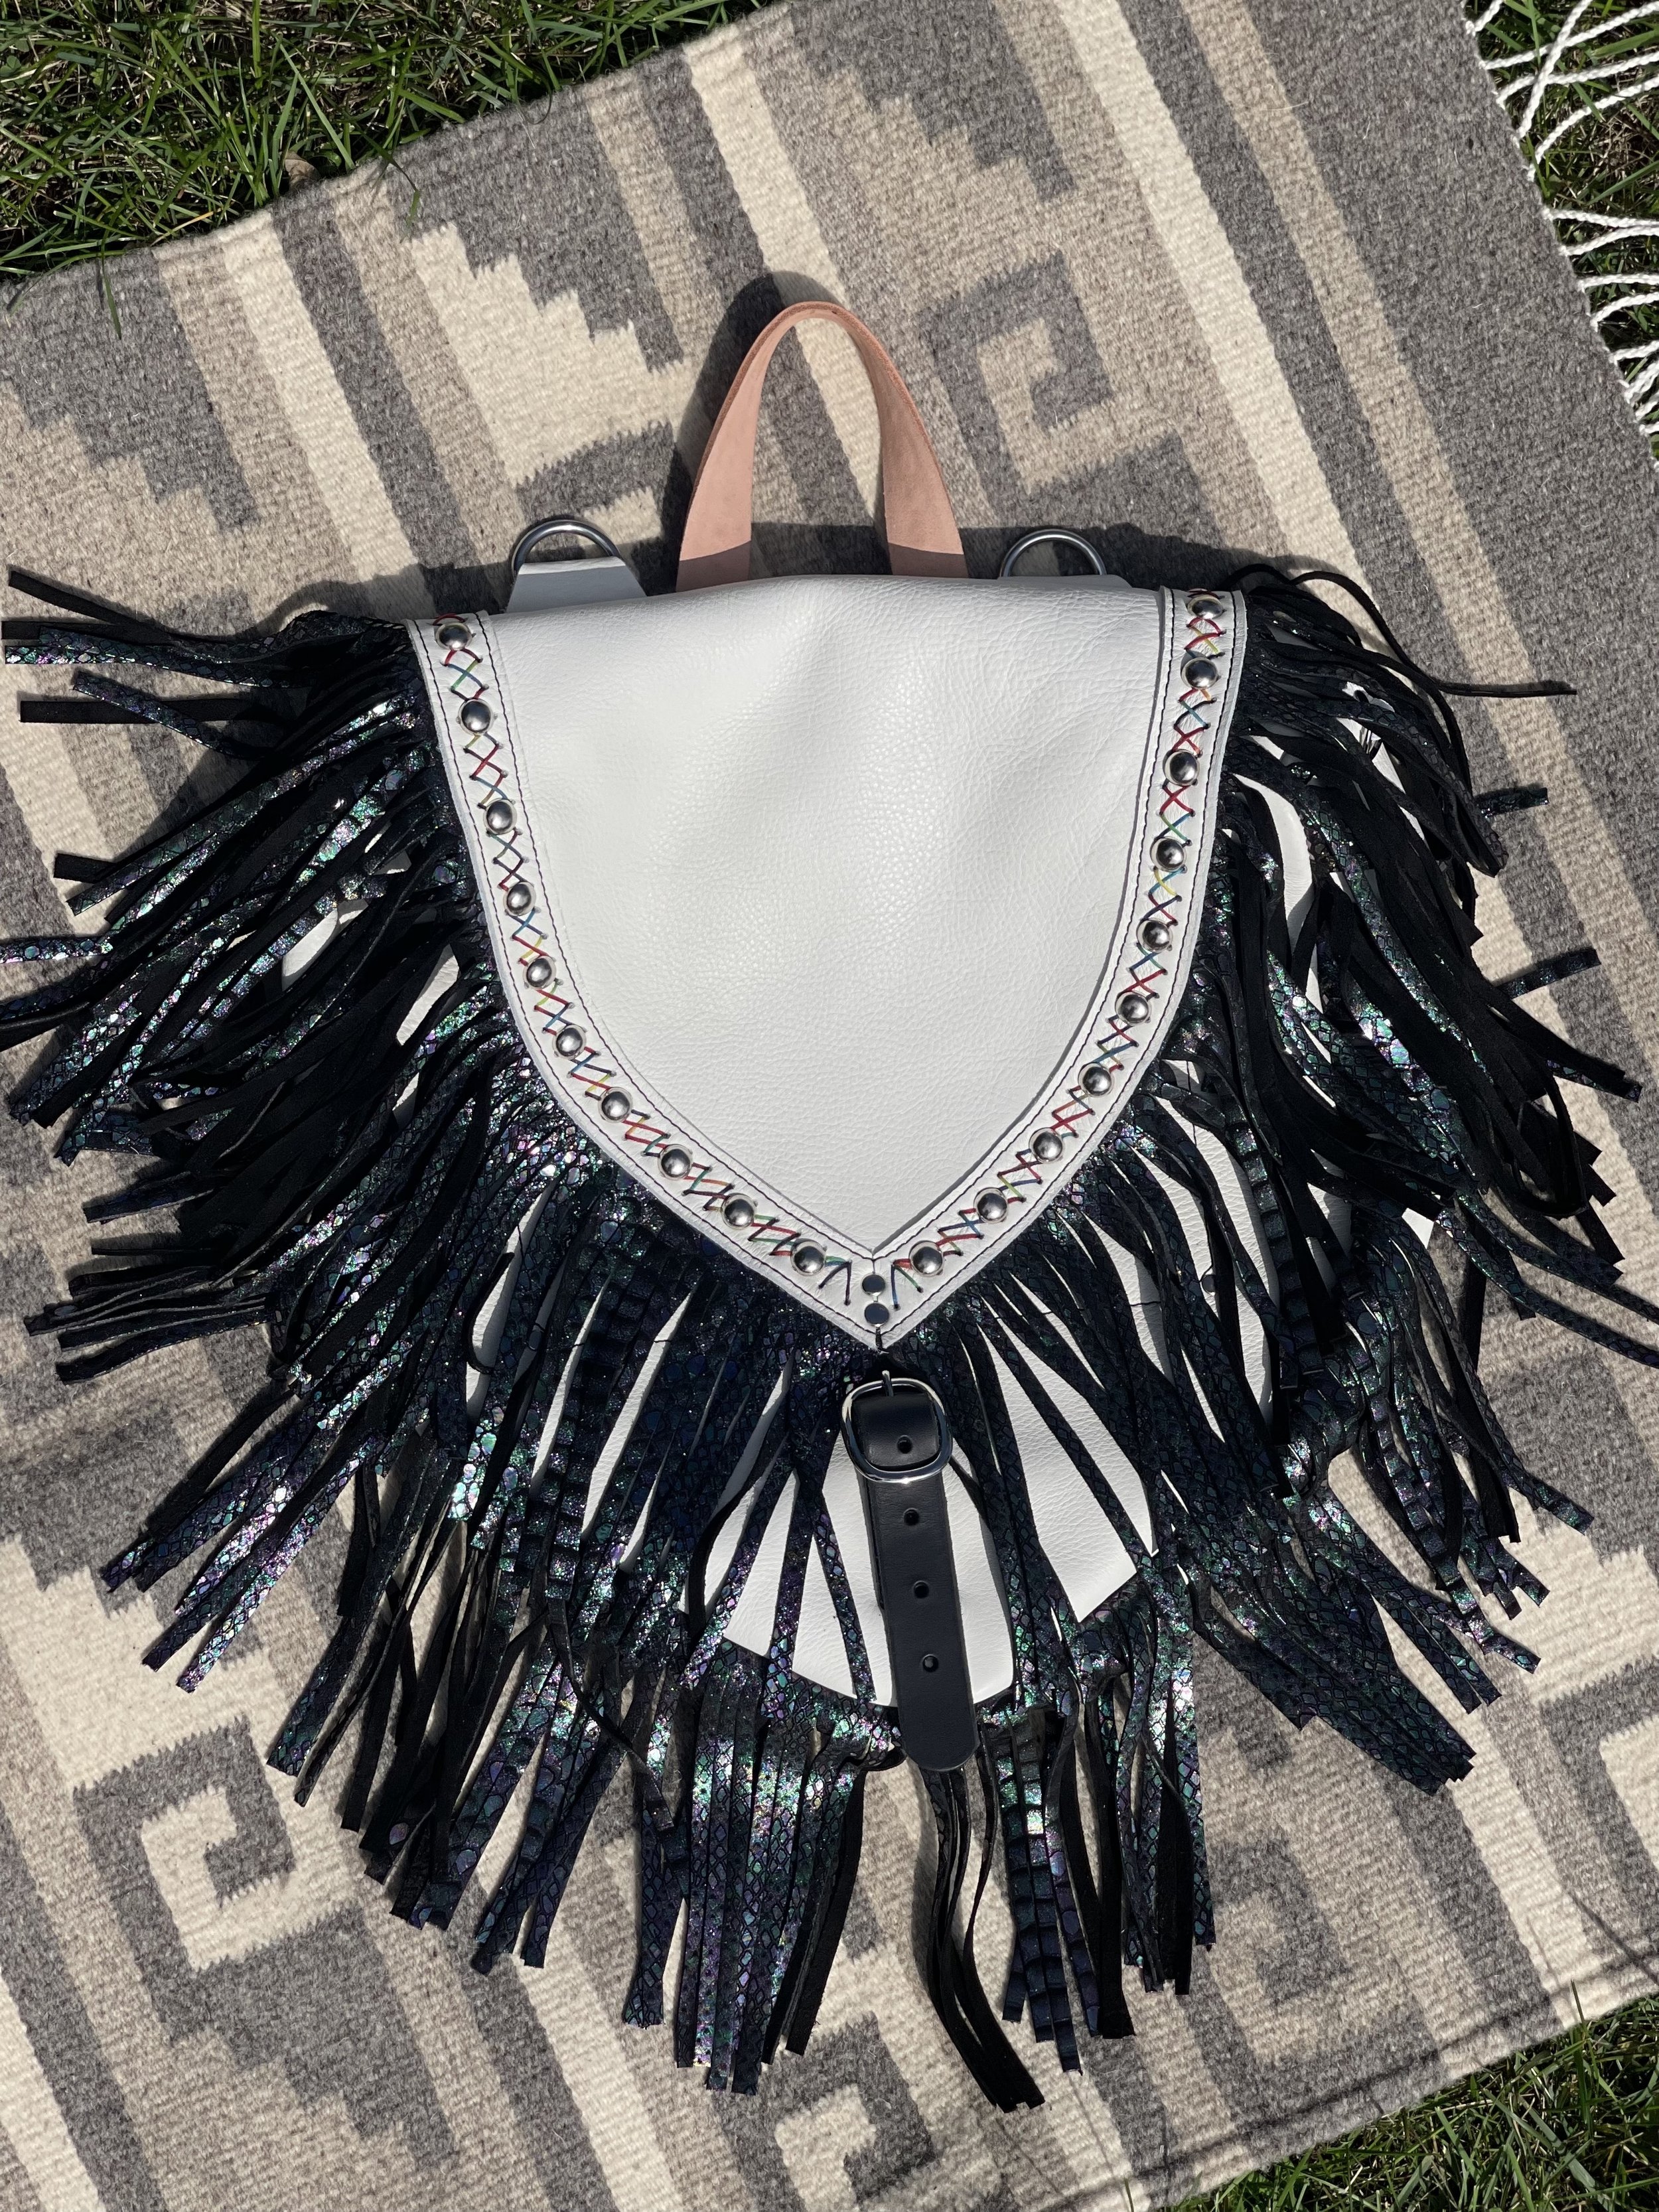 Brittany Convertible Bag - White cowhide leather, Chameleon Python fringe, Rainbow criss-cross hand stitching, nickel hardware, flair d-ring, hand-stamped vegetable tanned leather handle